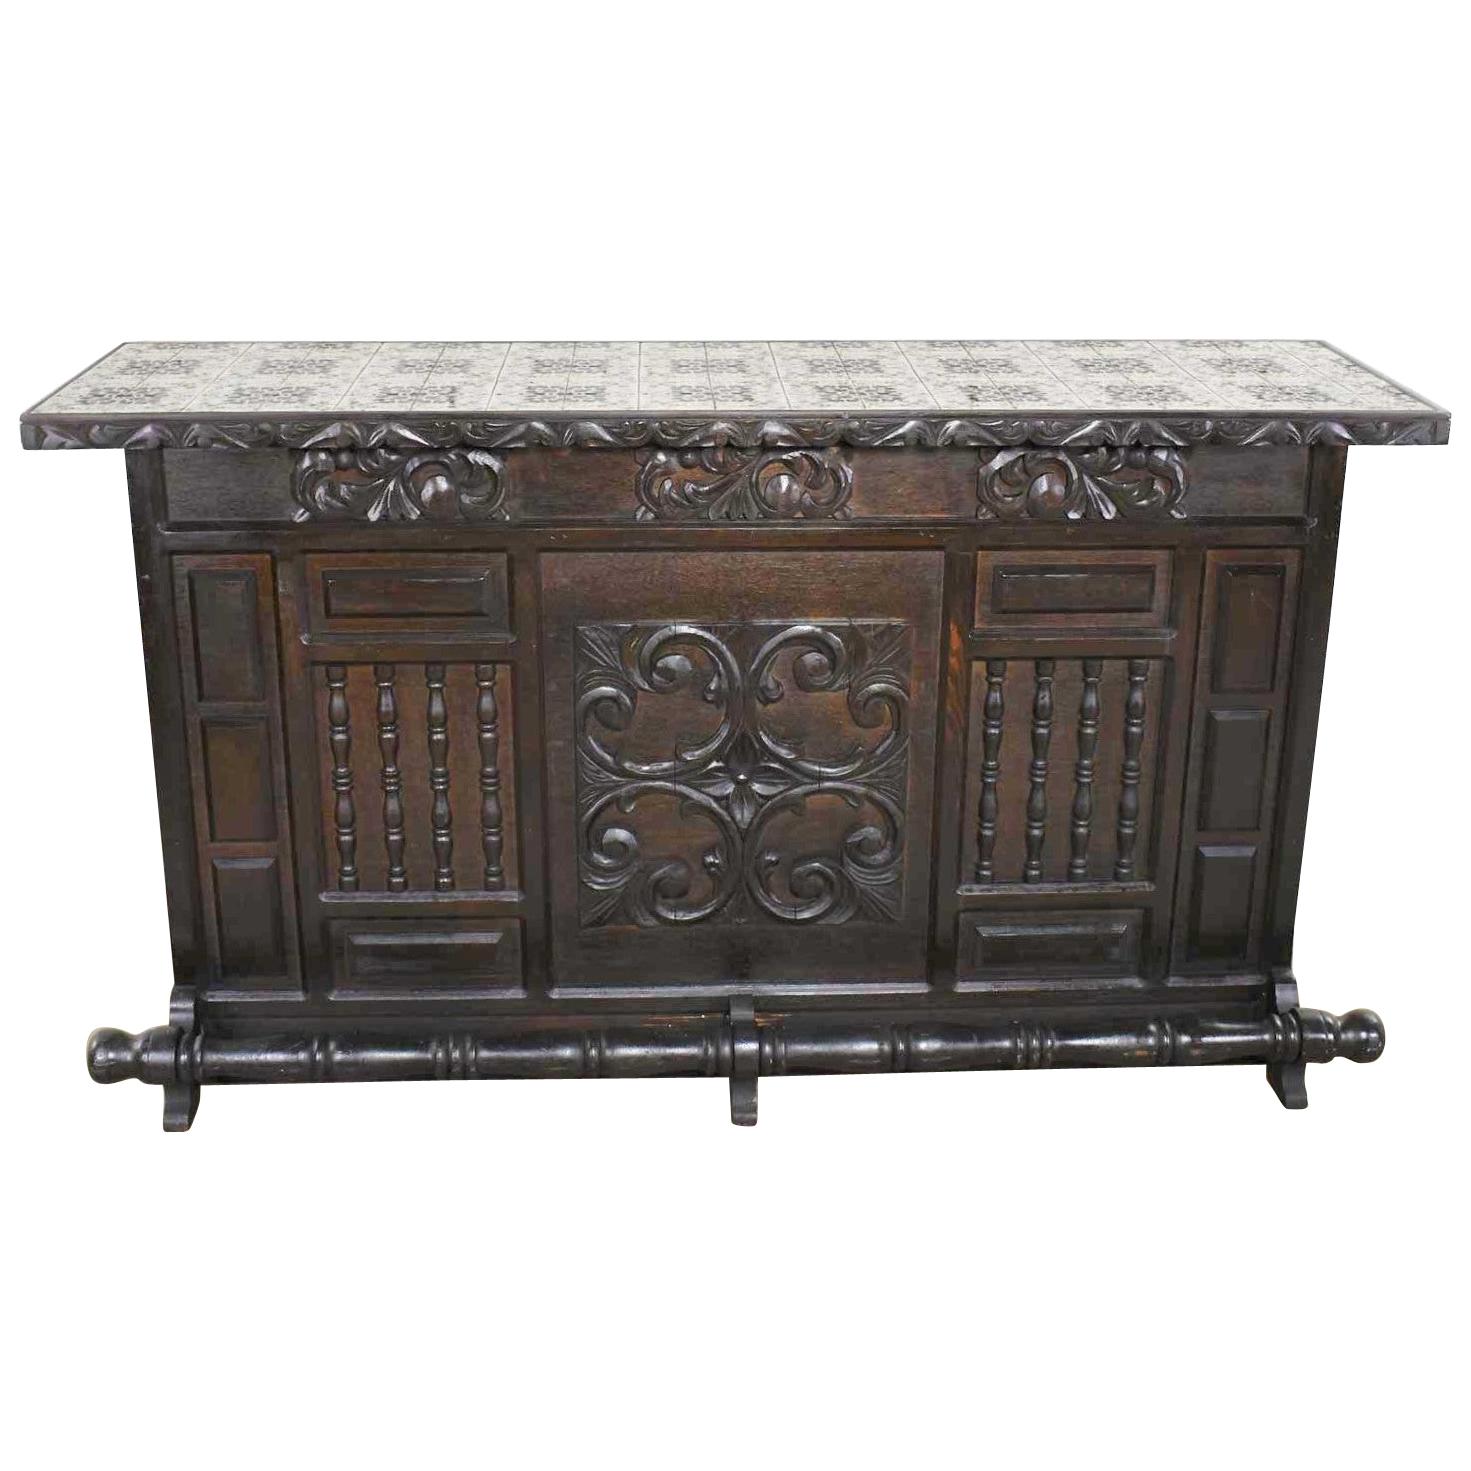 Spanish Revival Style Dry Bar with Inlaid Tile Top in Style Artes de Mexico